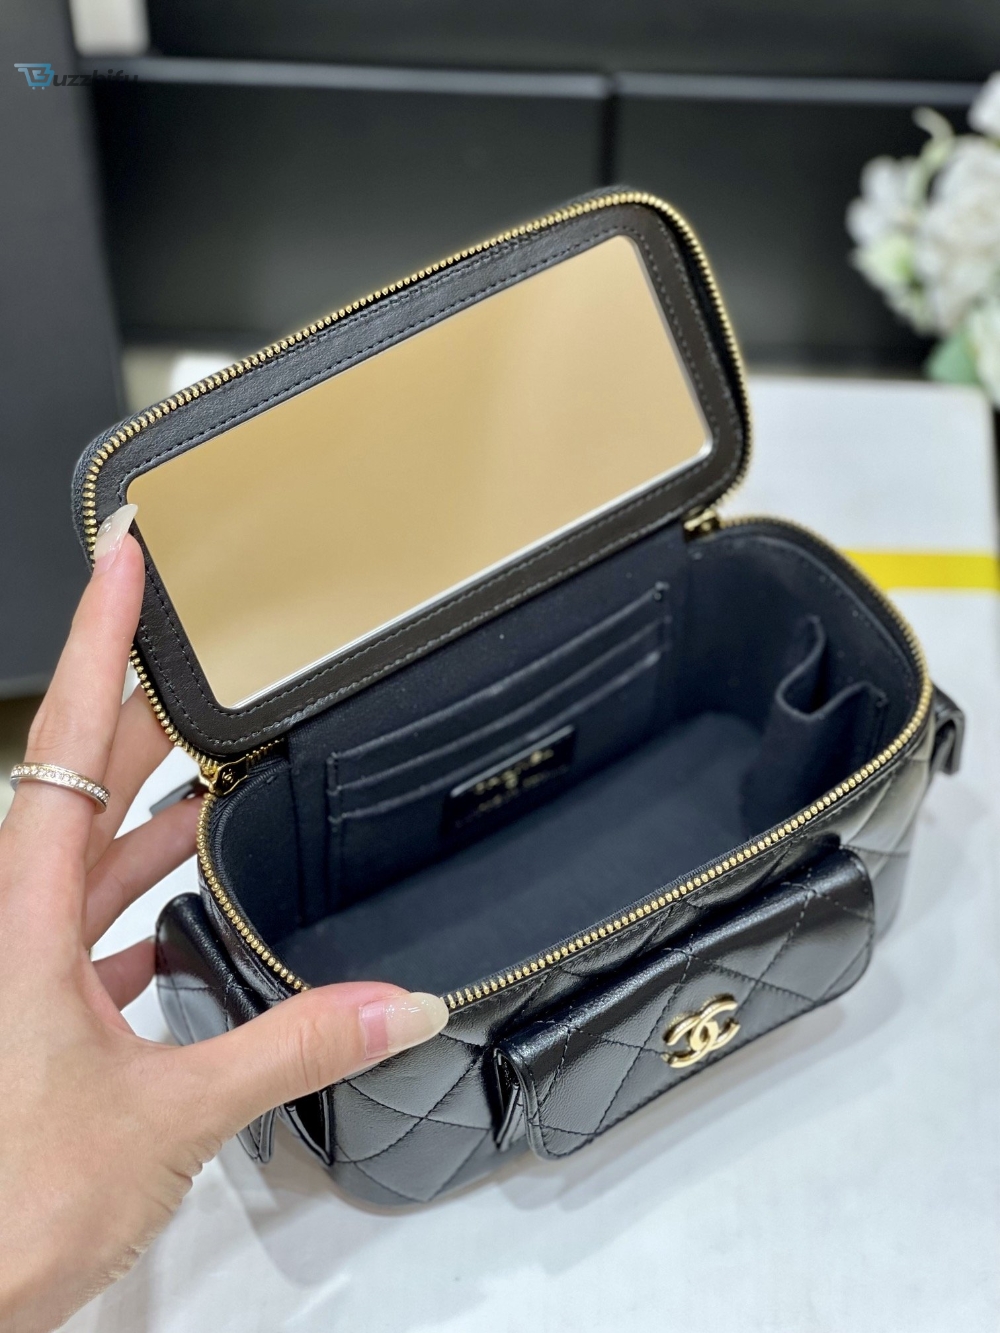 Chanel Vanity Bag With Strap Black For Women Womens Bags 6.6In17cm Ap3017 B09208 94305